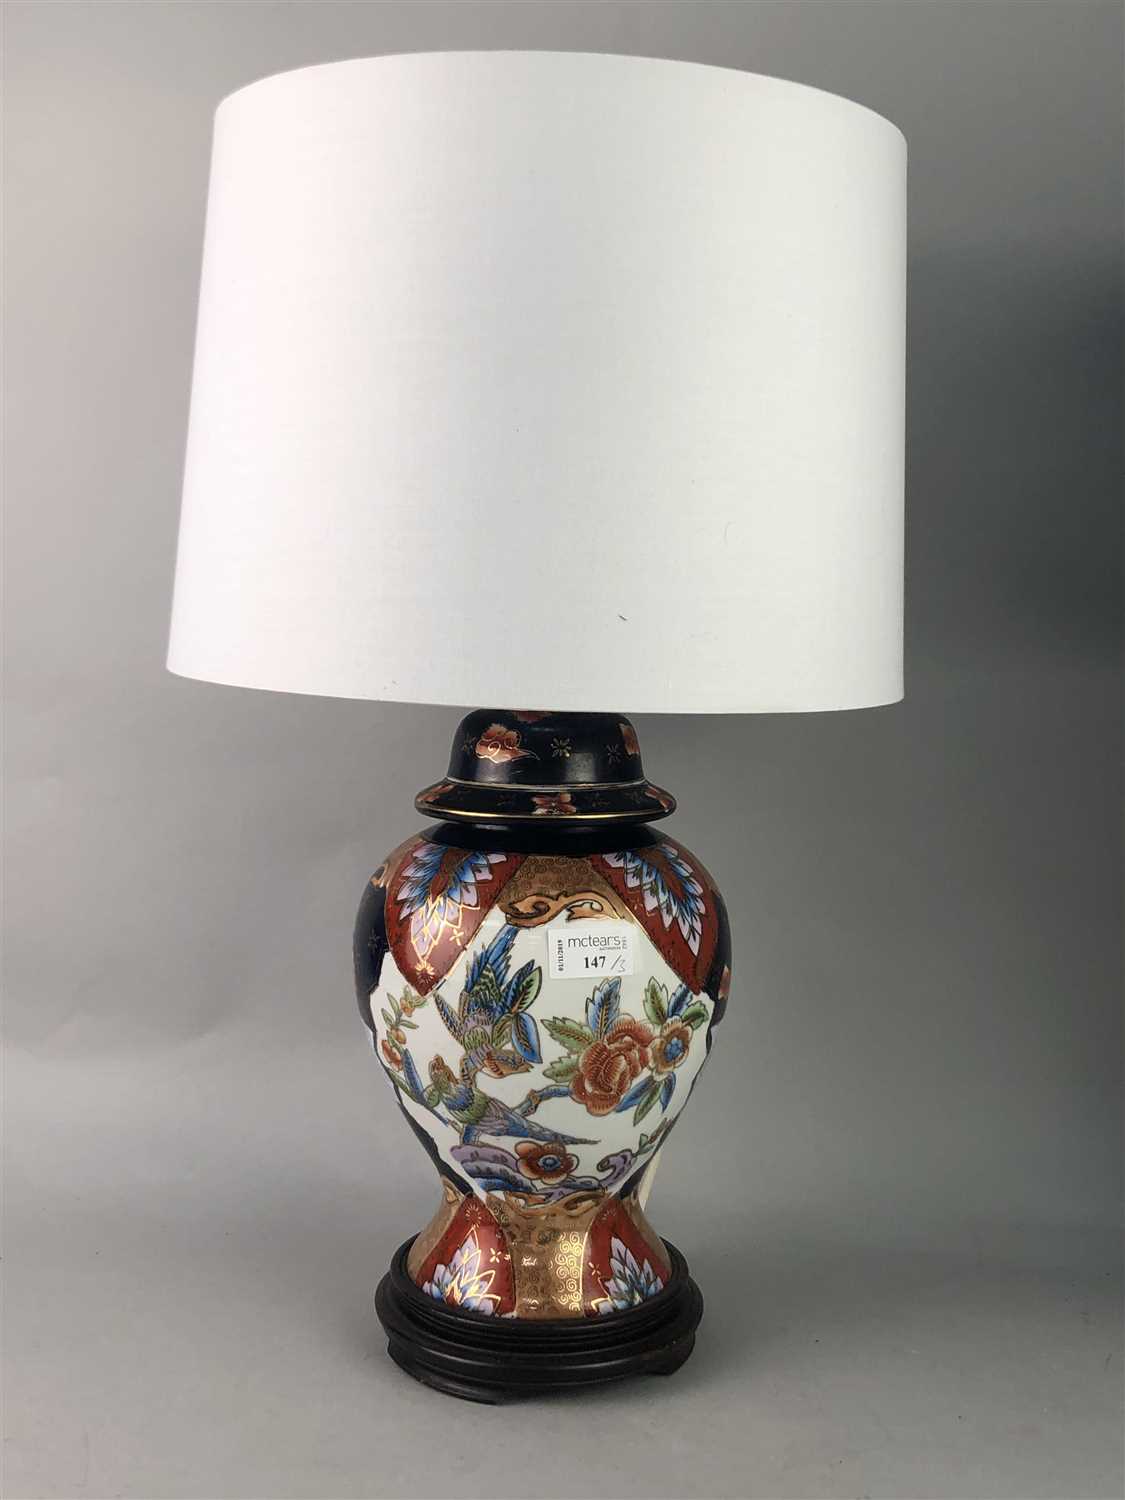 Lot 147 - A PAIR OF TABLE LAMPS AND ANOTHER LAMP